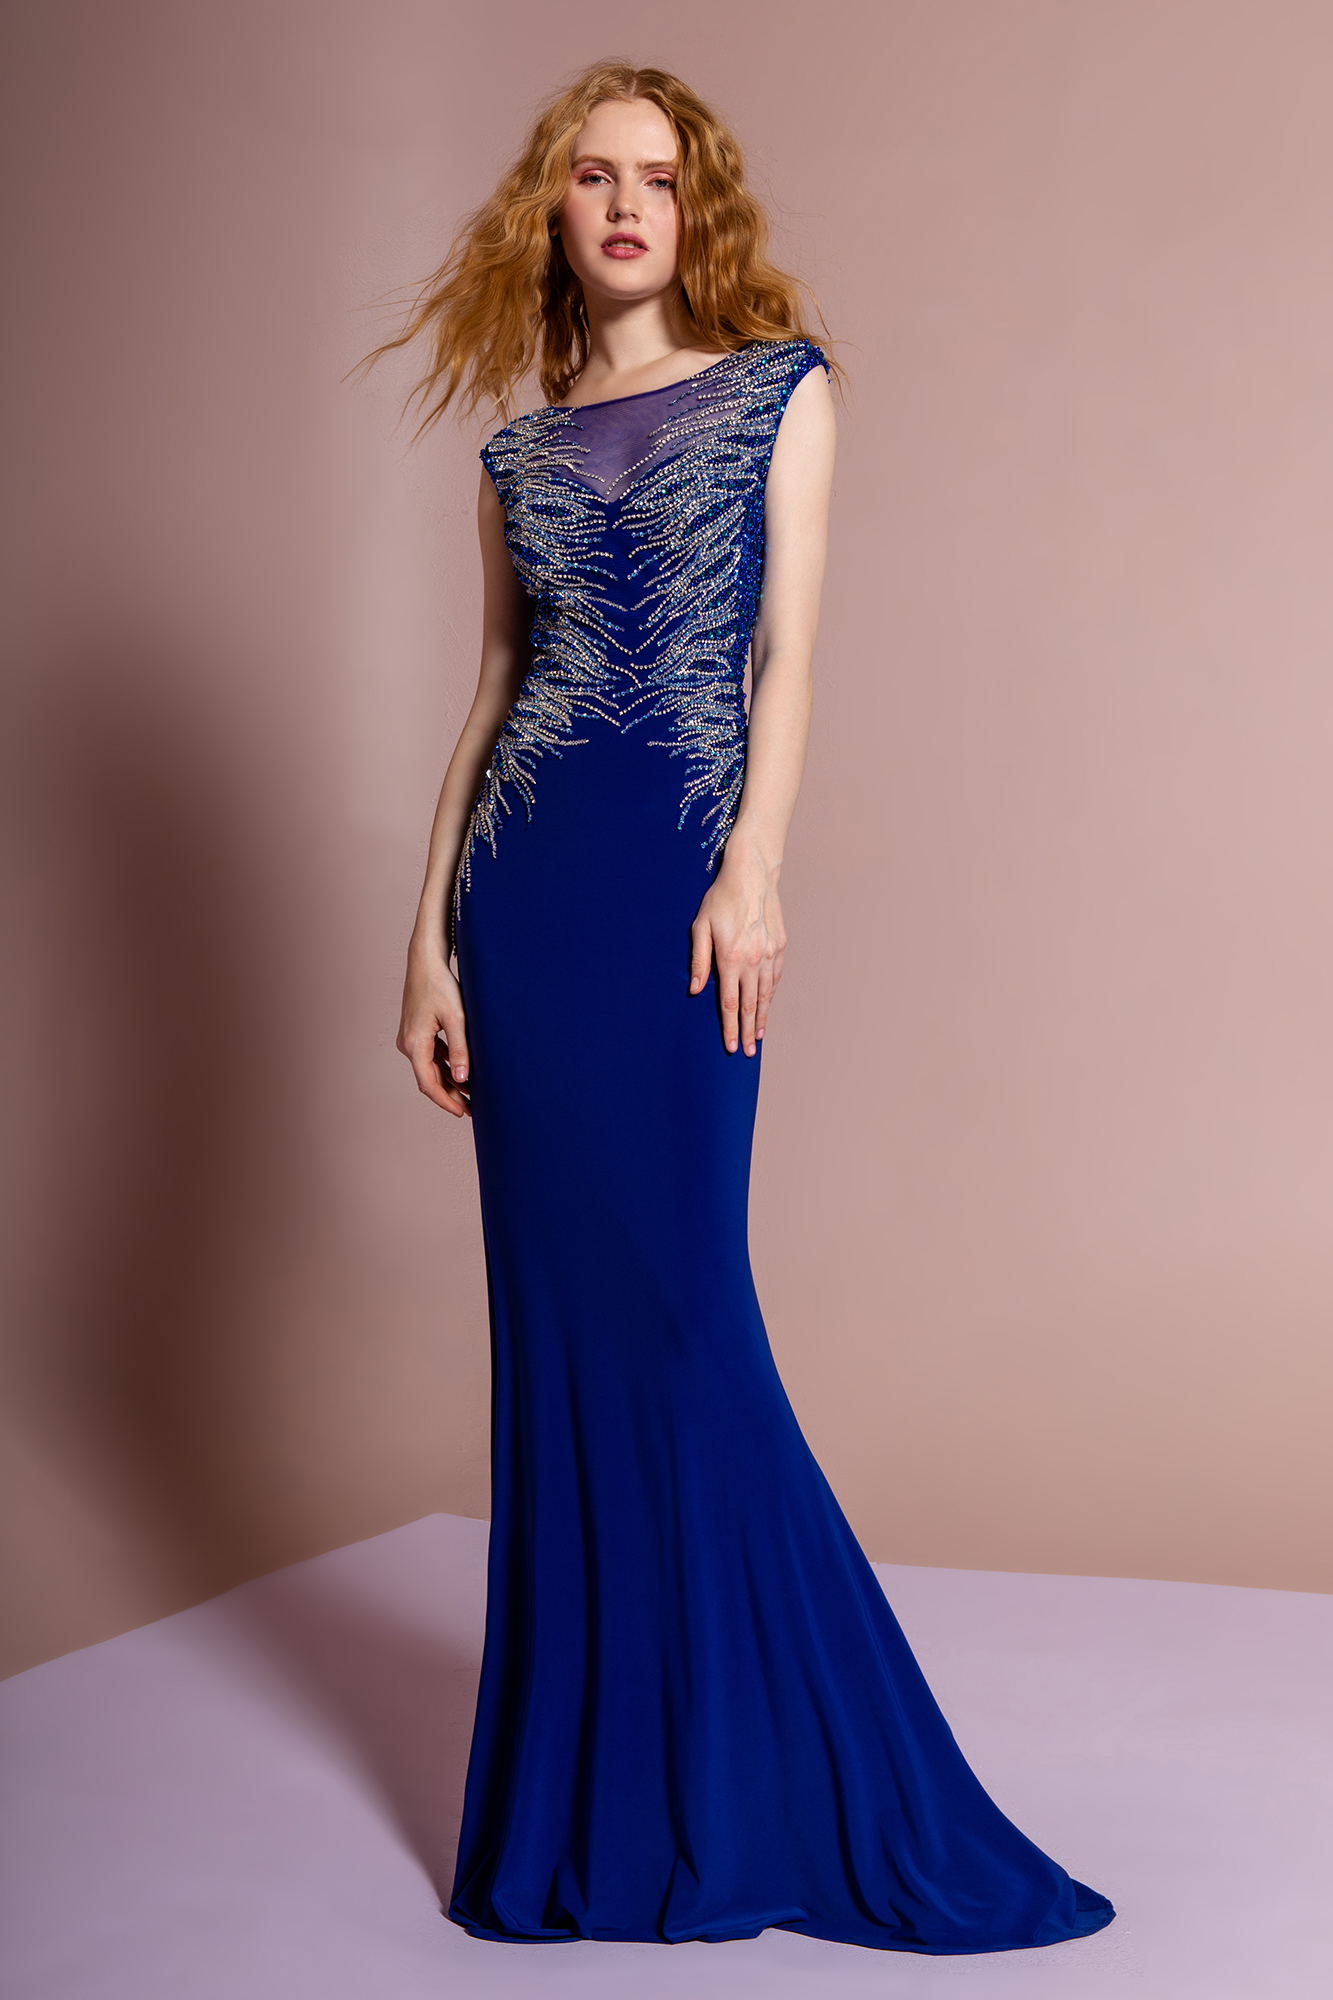 woman in blue gown